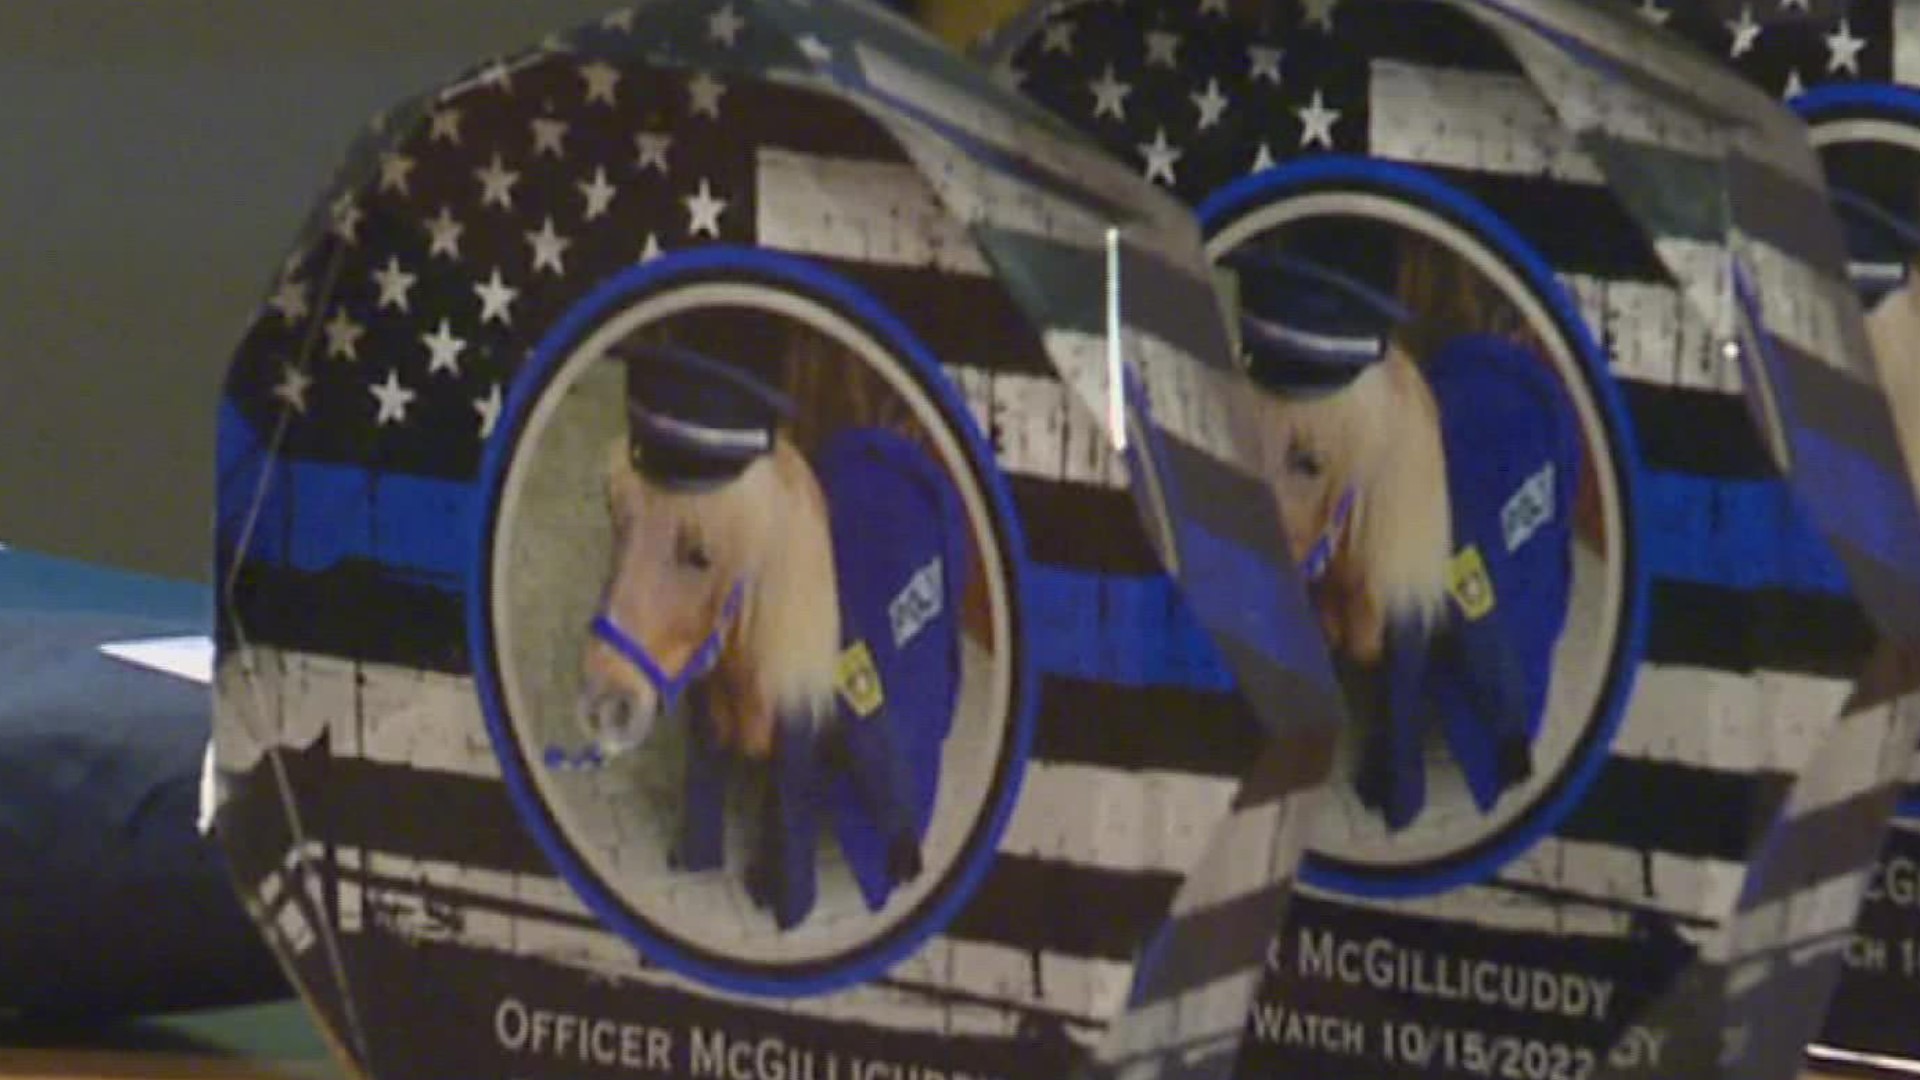 Mourners from across Quarryville gathered tonight to honor the life of equine Officer McGillicuddy at a memorial service.